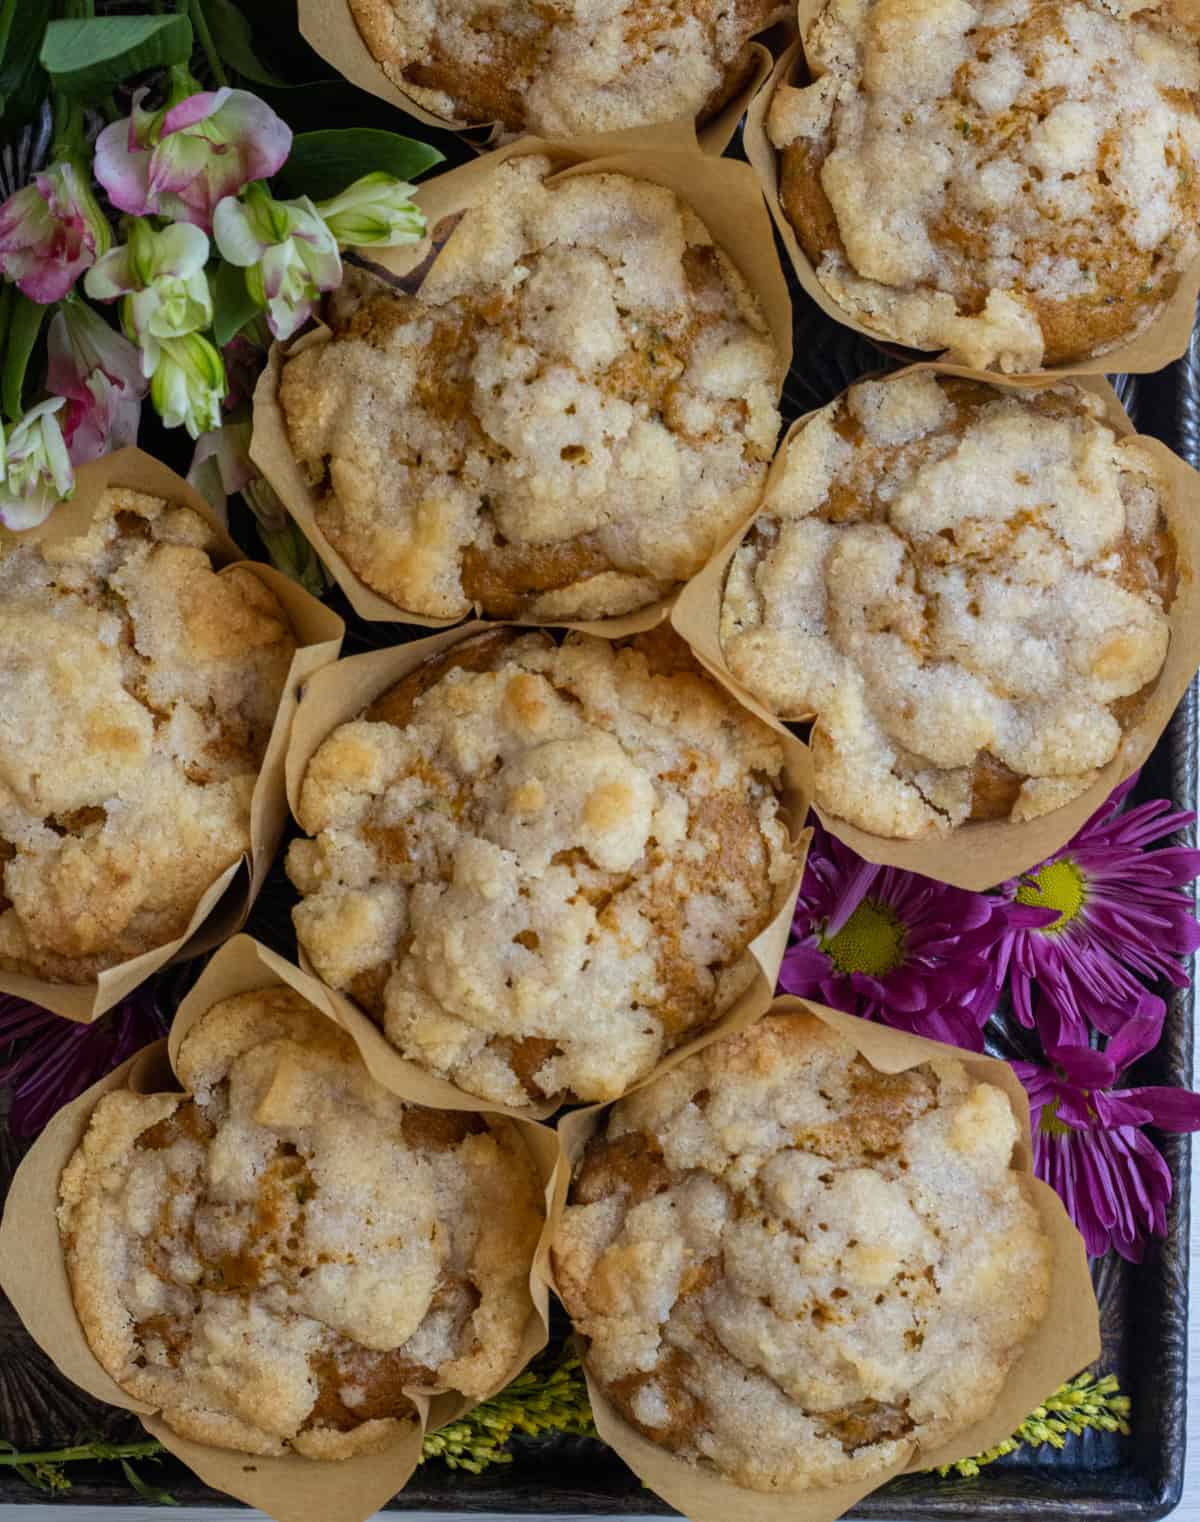 Streusel topped muffins on a tray with purple flowers.